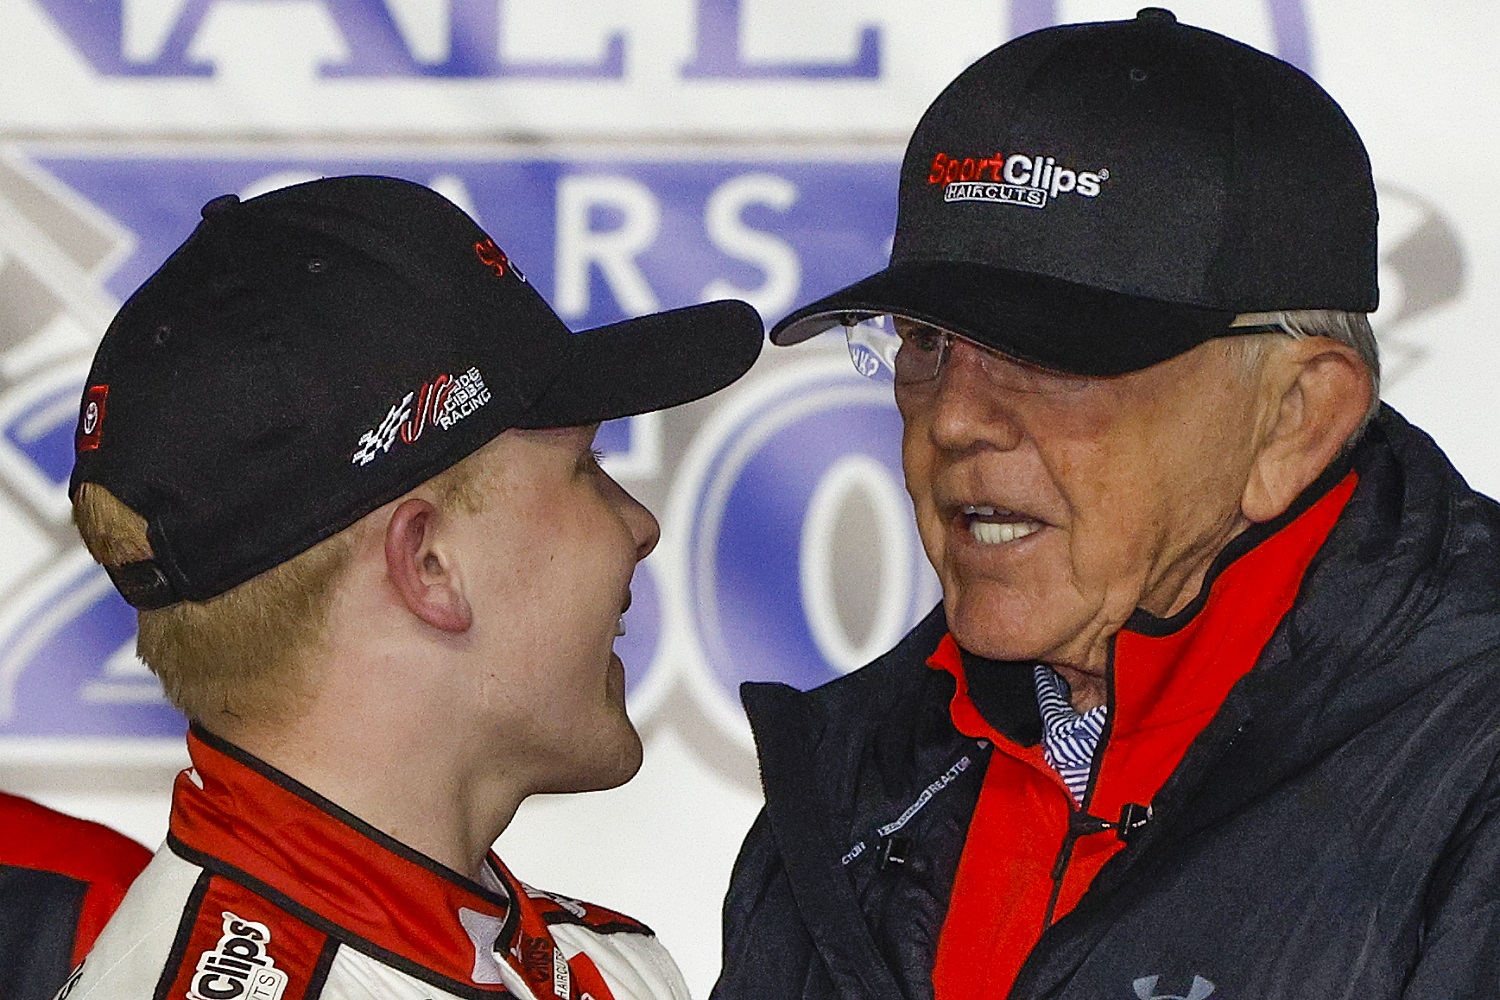 Ty Gibbs is congratulated by his grandfather and team owner Joe Gibbs in after winning the NASCAR Xfinity Series Nalley Cars 250 at Atlanta Motor Speedway on March 19, 2022.